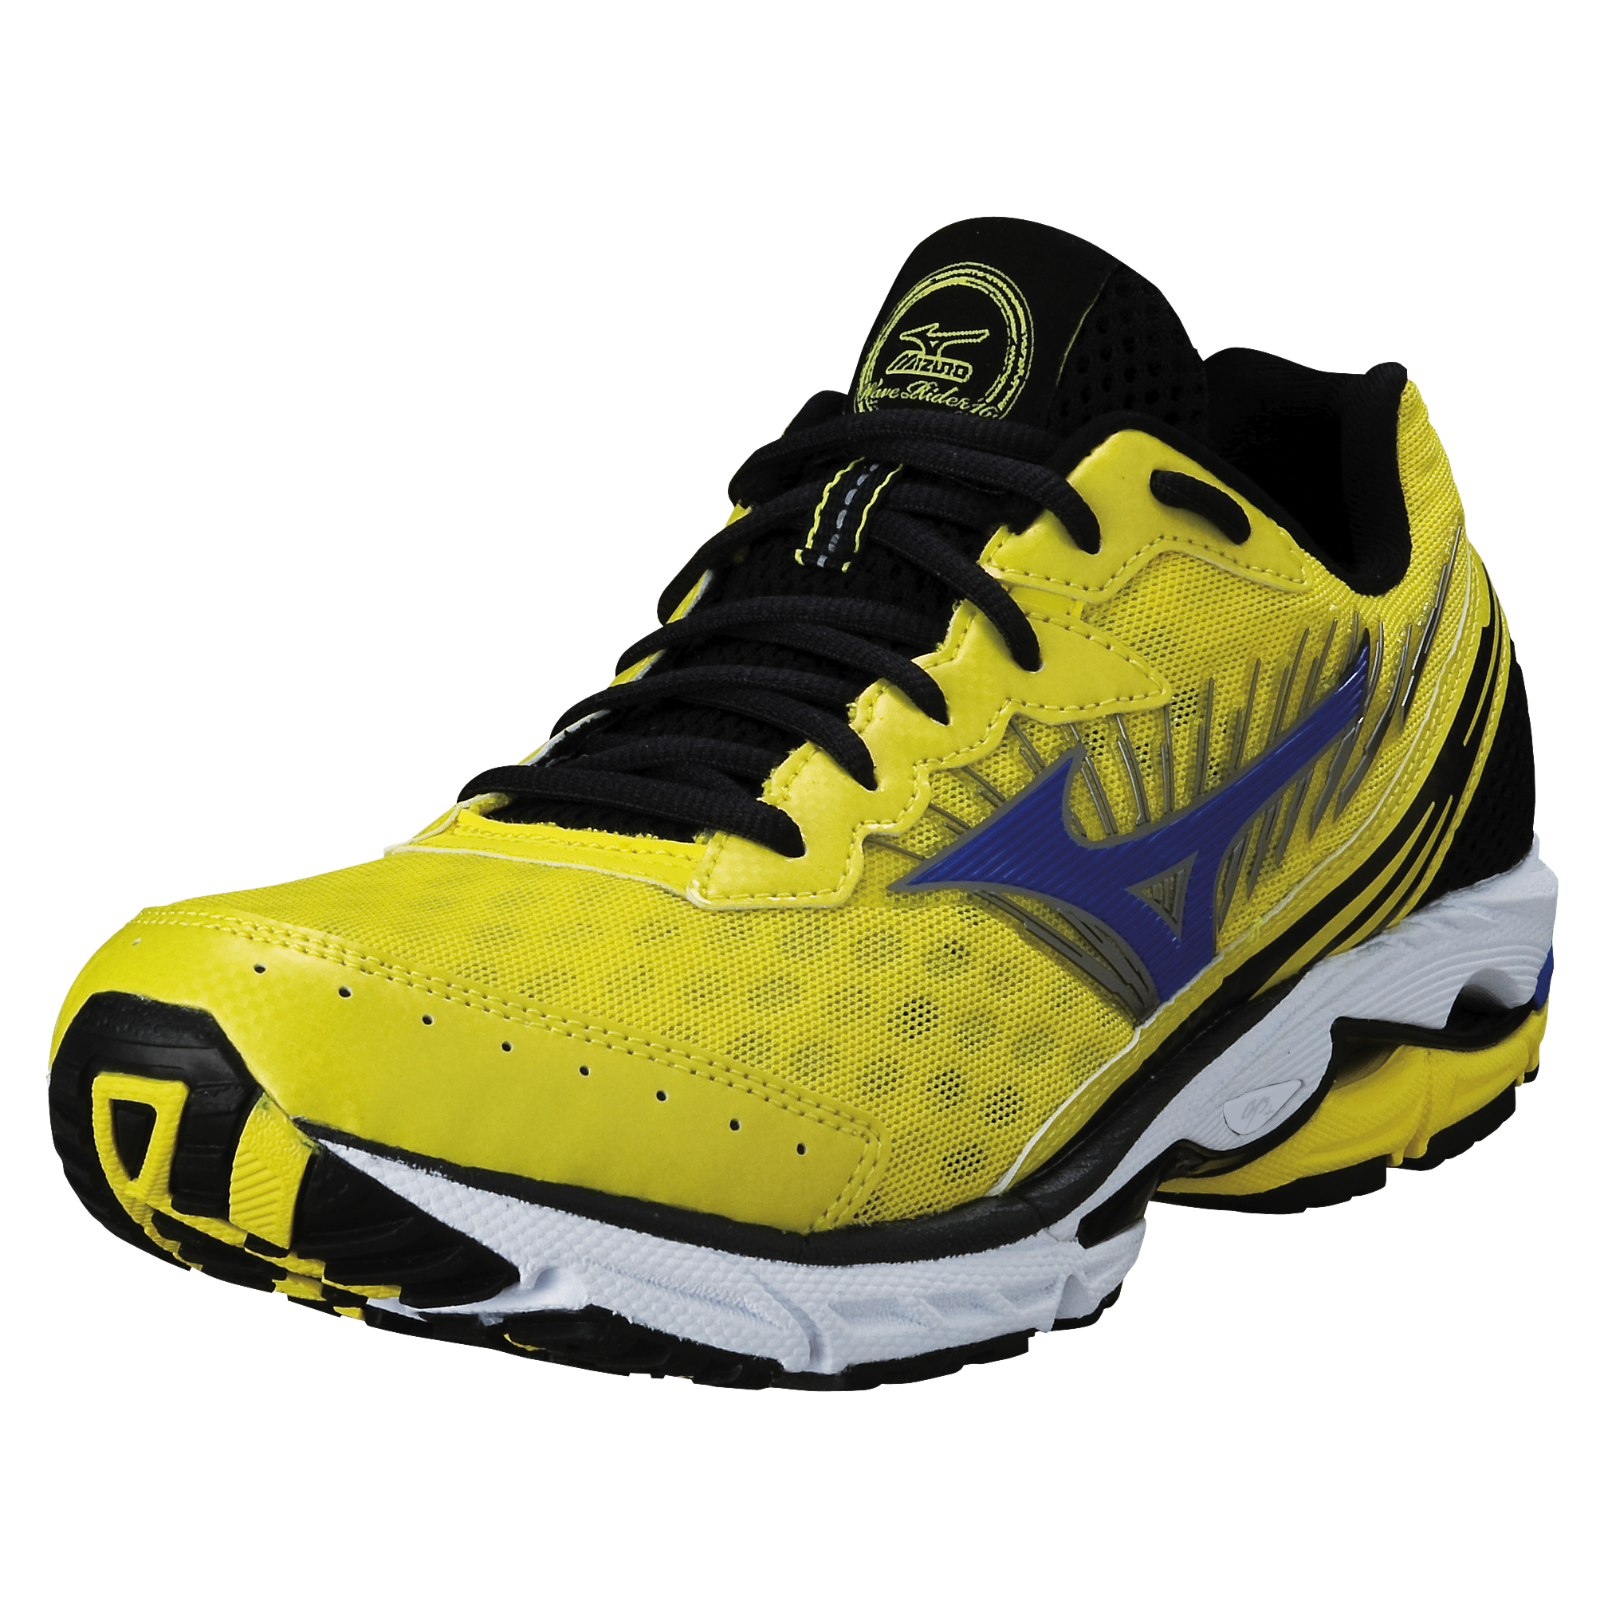 Mizuno Running shoes PNG images Download 